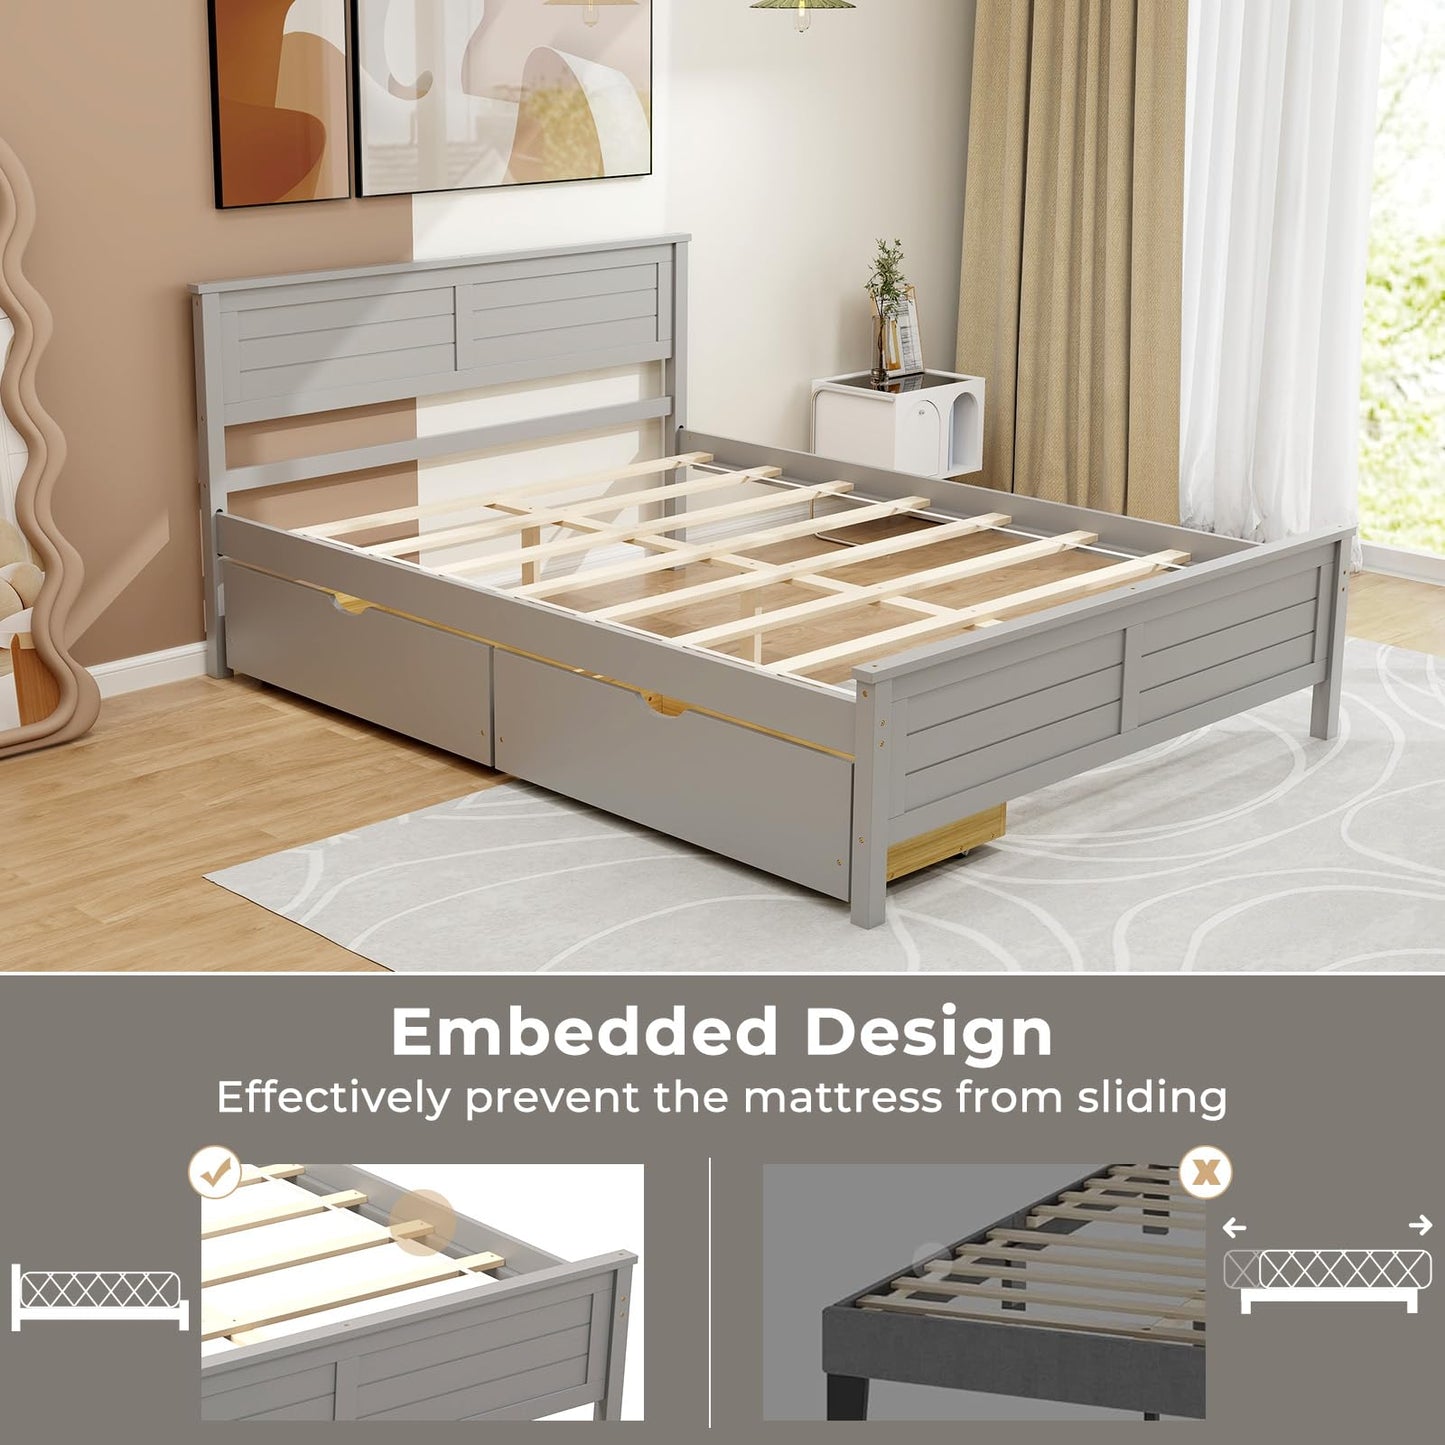 Giantex Wood Full Size Bed Frame with 2 Storage Drawers, Solid Wood Platform Bed with Headboard, Wooden Slats Mattress Foundation, No Spring Needed,